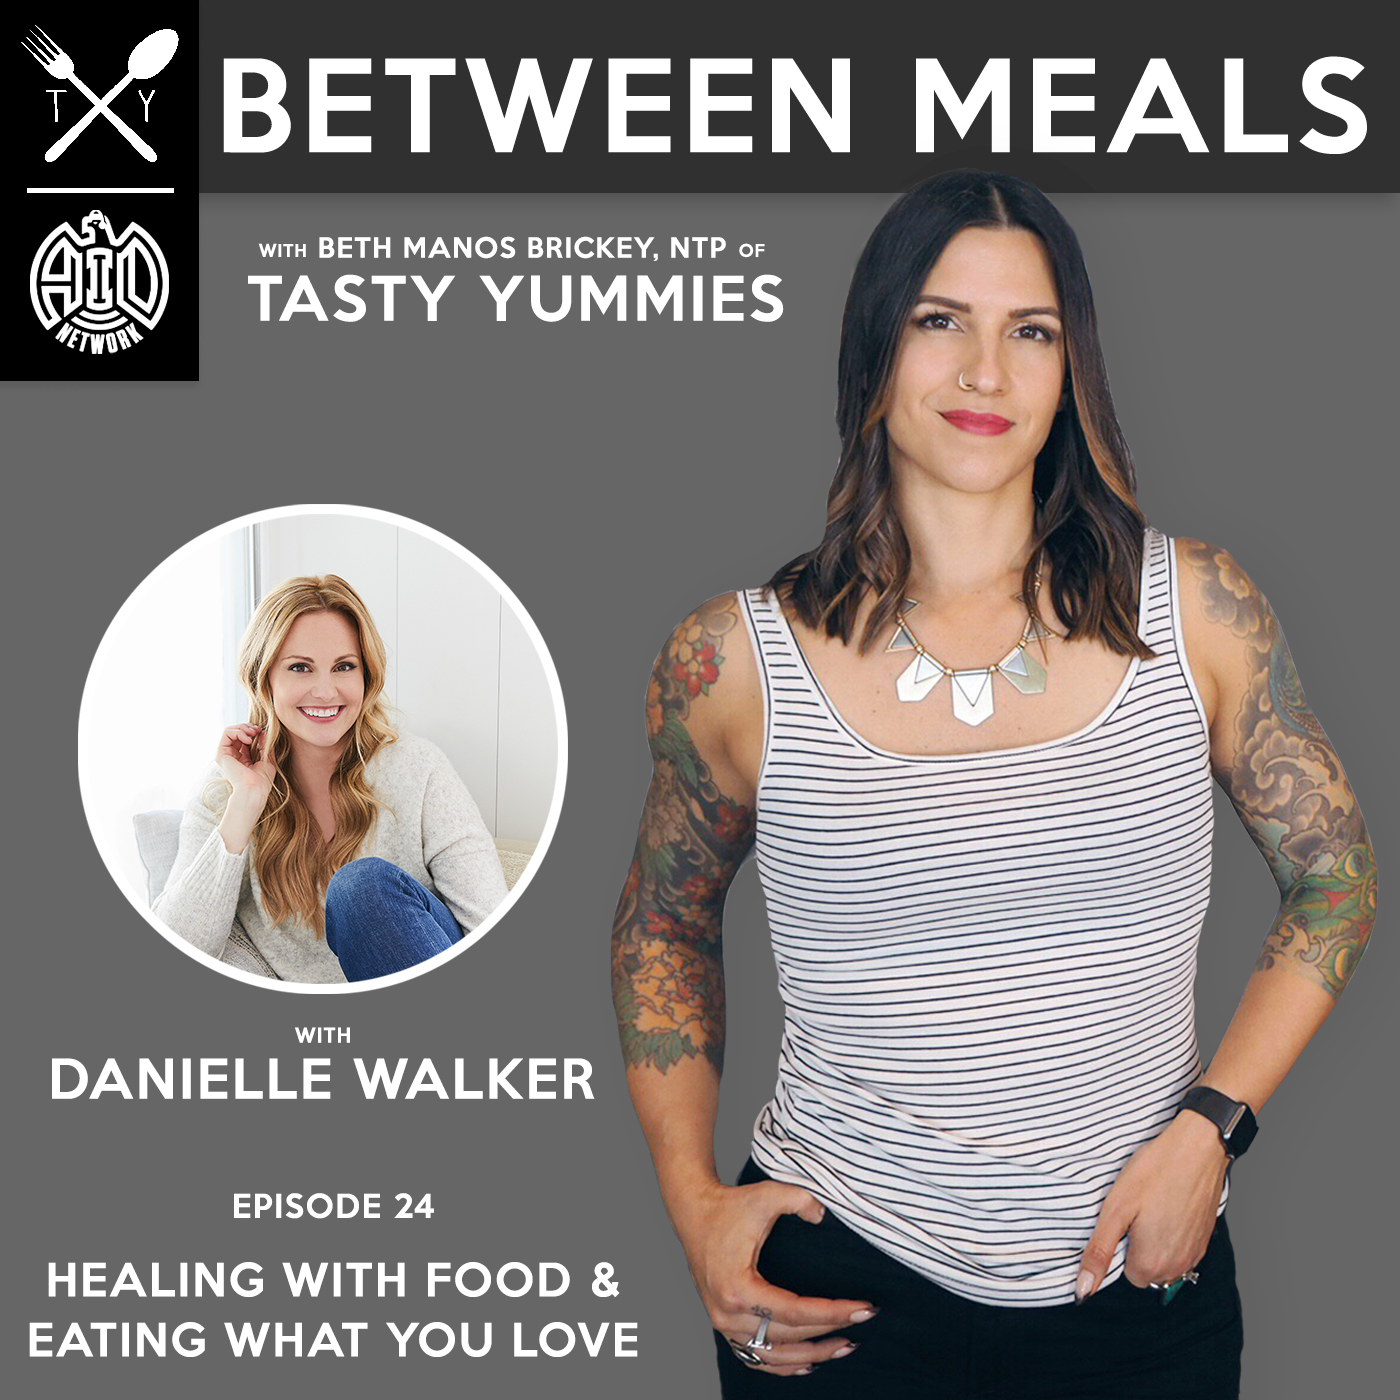 Between Meals Podcast. Episode 24: Healing with Food and Eating What You Love with Danielle Walker